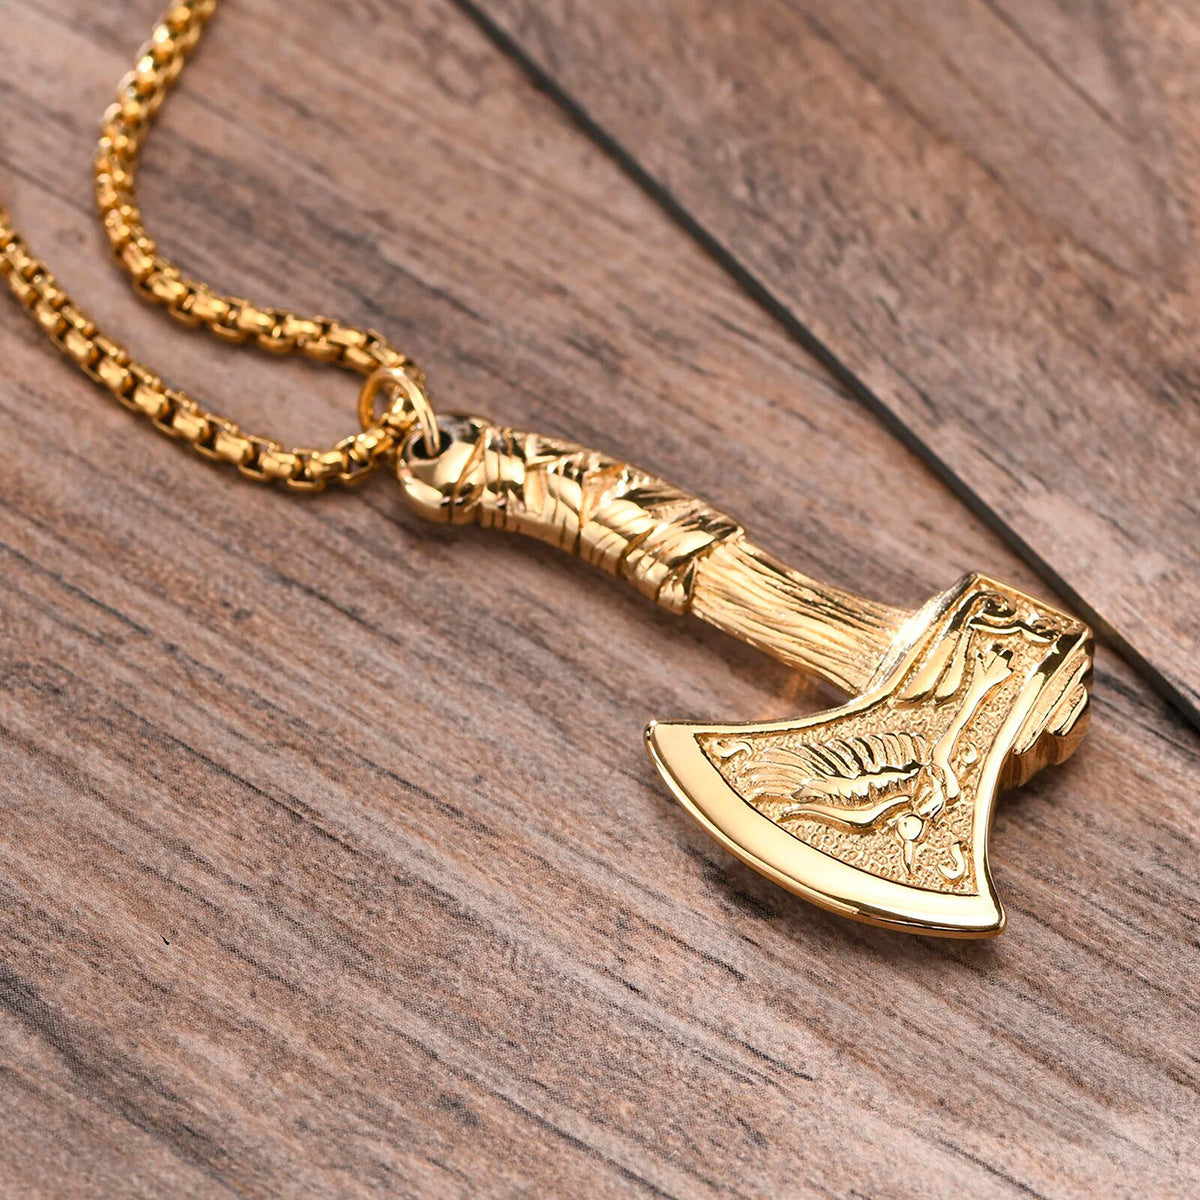 Viking - Nordic Viking Axe Necklace for Men, Gothic Norse Punk Jewelry